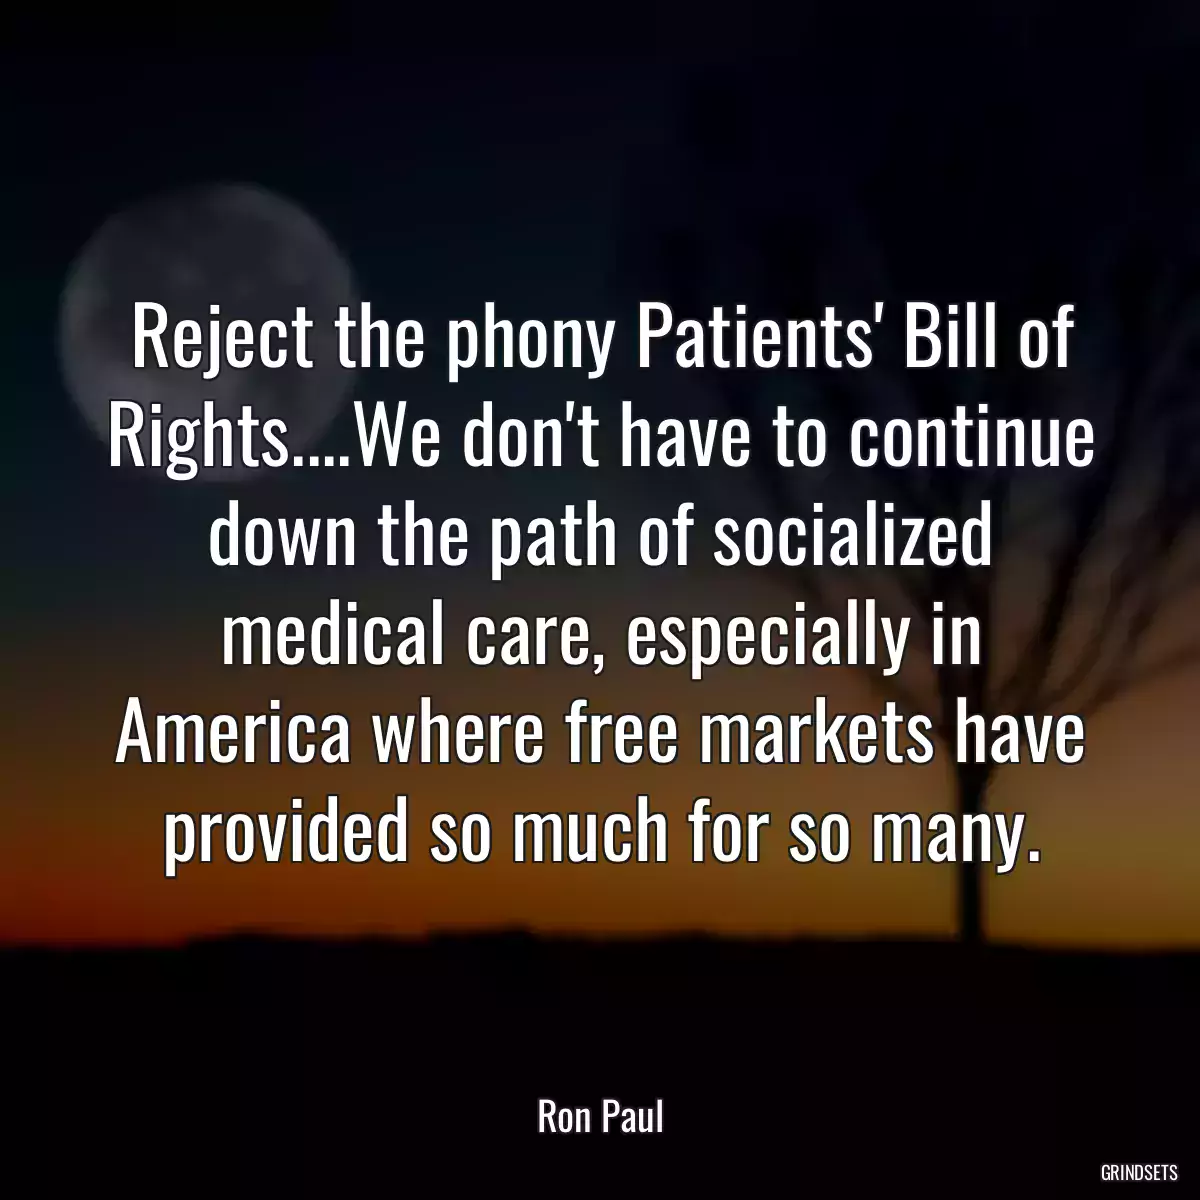 Reject the phony Patients\' Bill of Rights....We don\'t have to continue down the path of socialized medical care, especially in America where free markets have provided so much for so many.